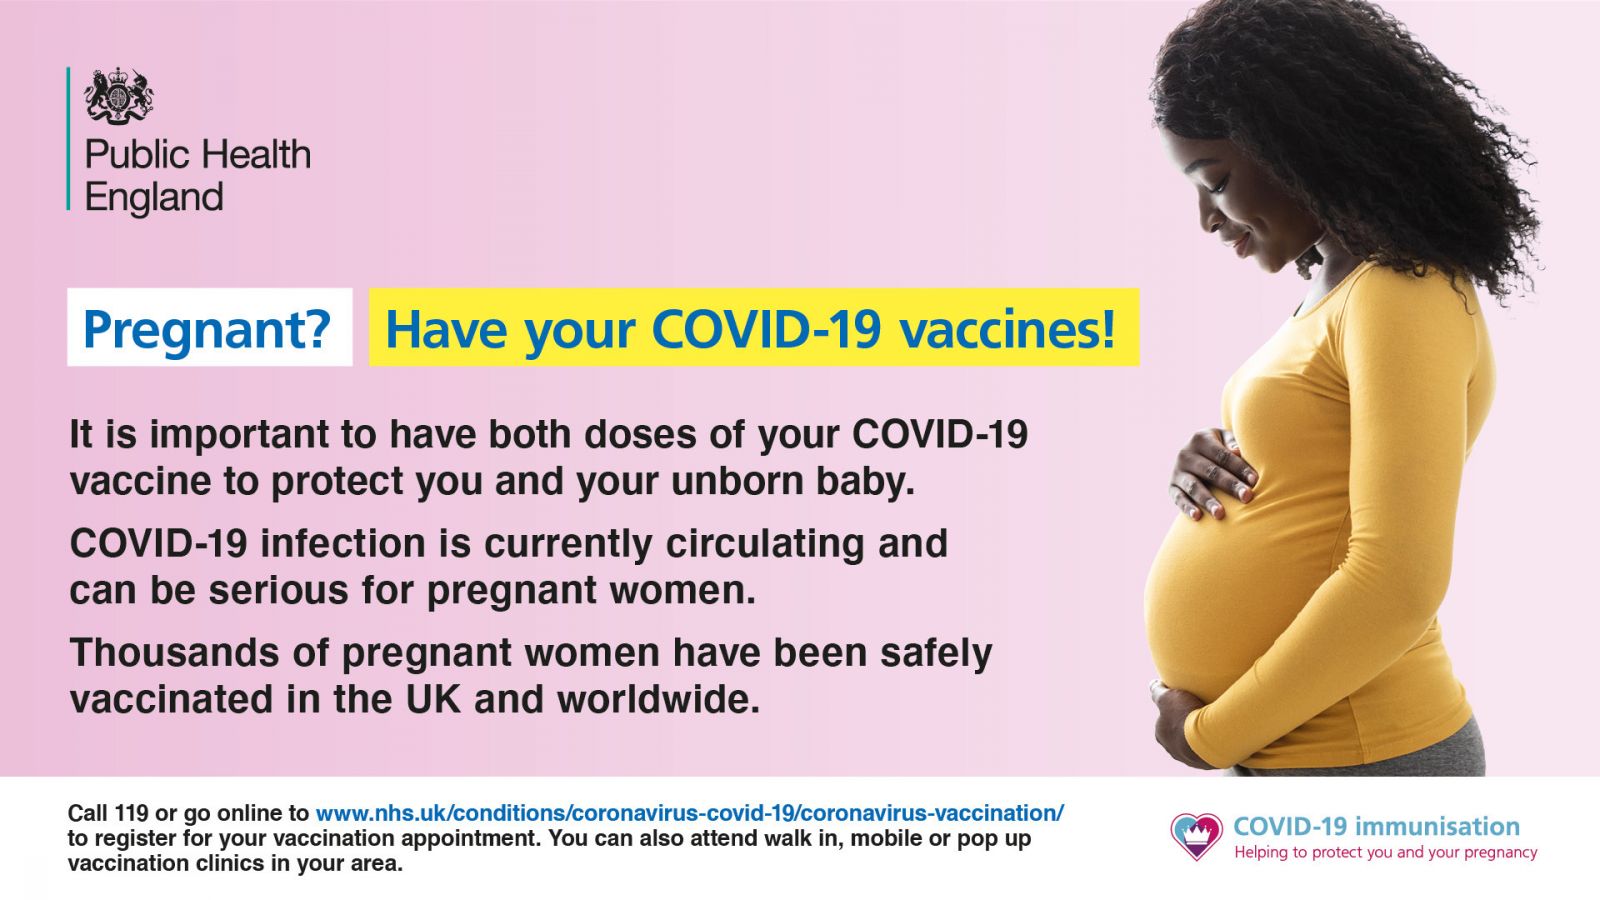 Public Health England promotional poster encouraging COVID-19 vaccinations for pregnant women